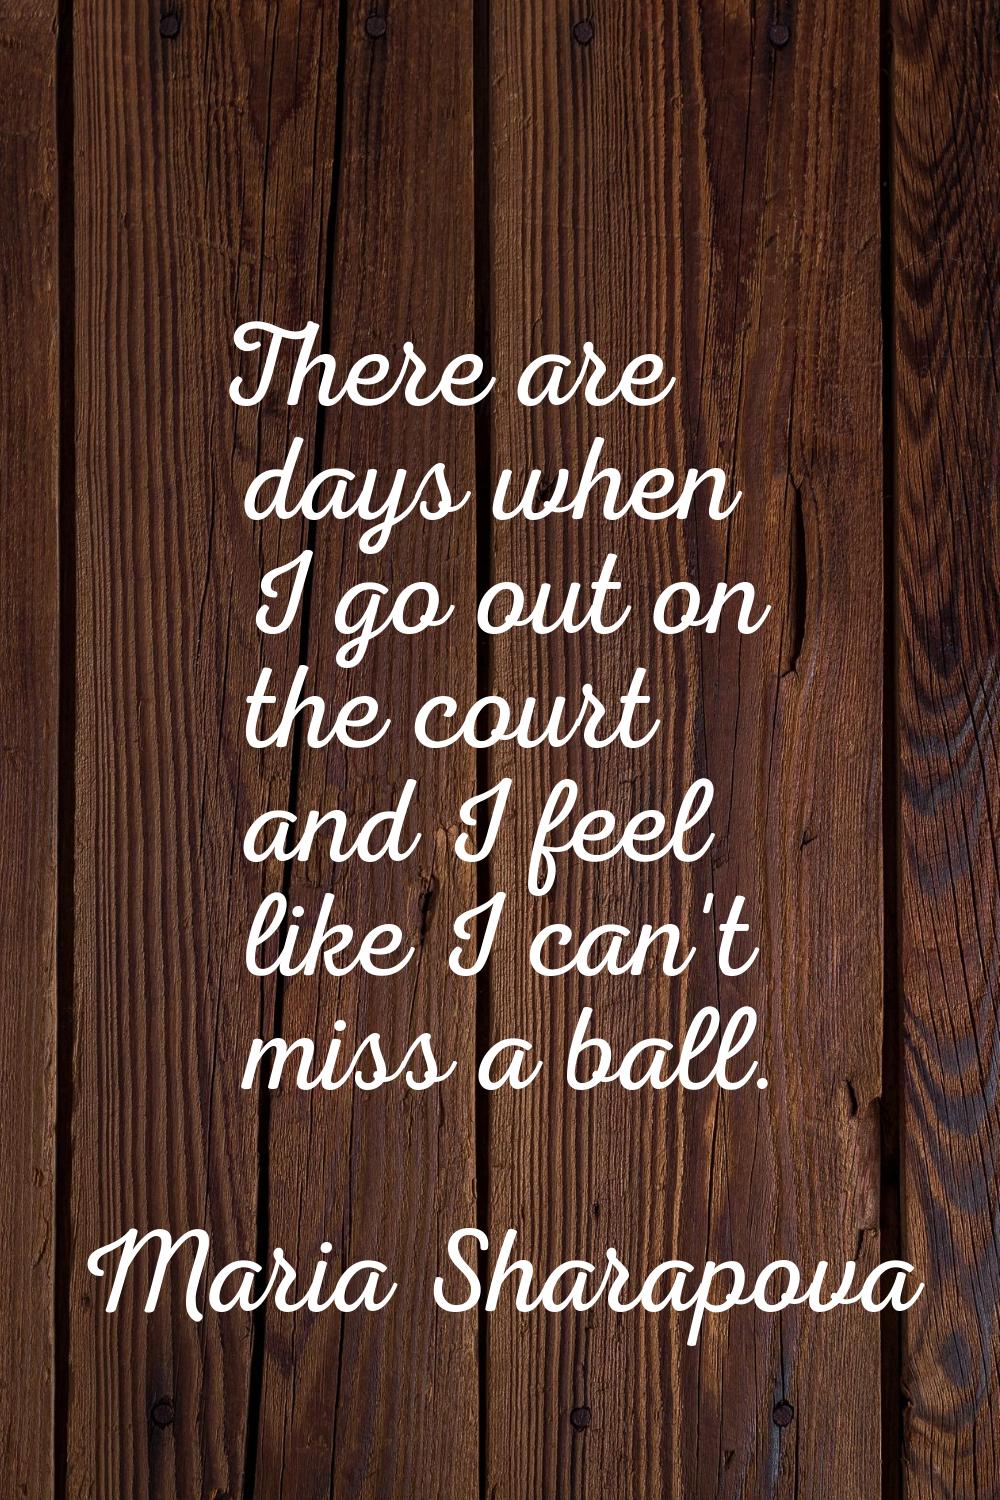 There are days when I go out on the court and I feel like I can't miss a ball.